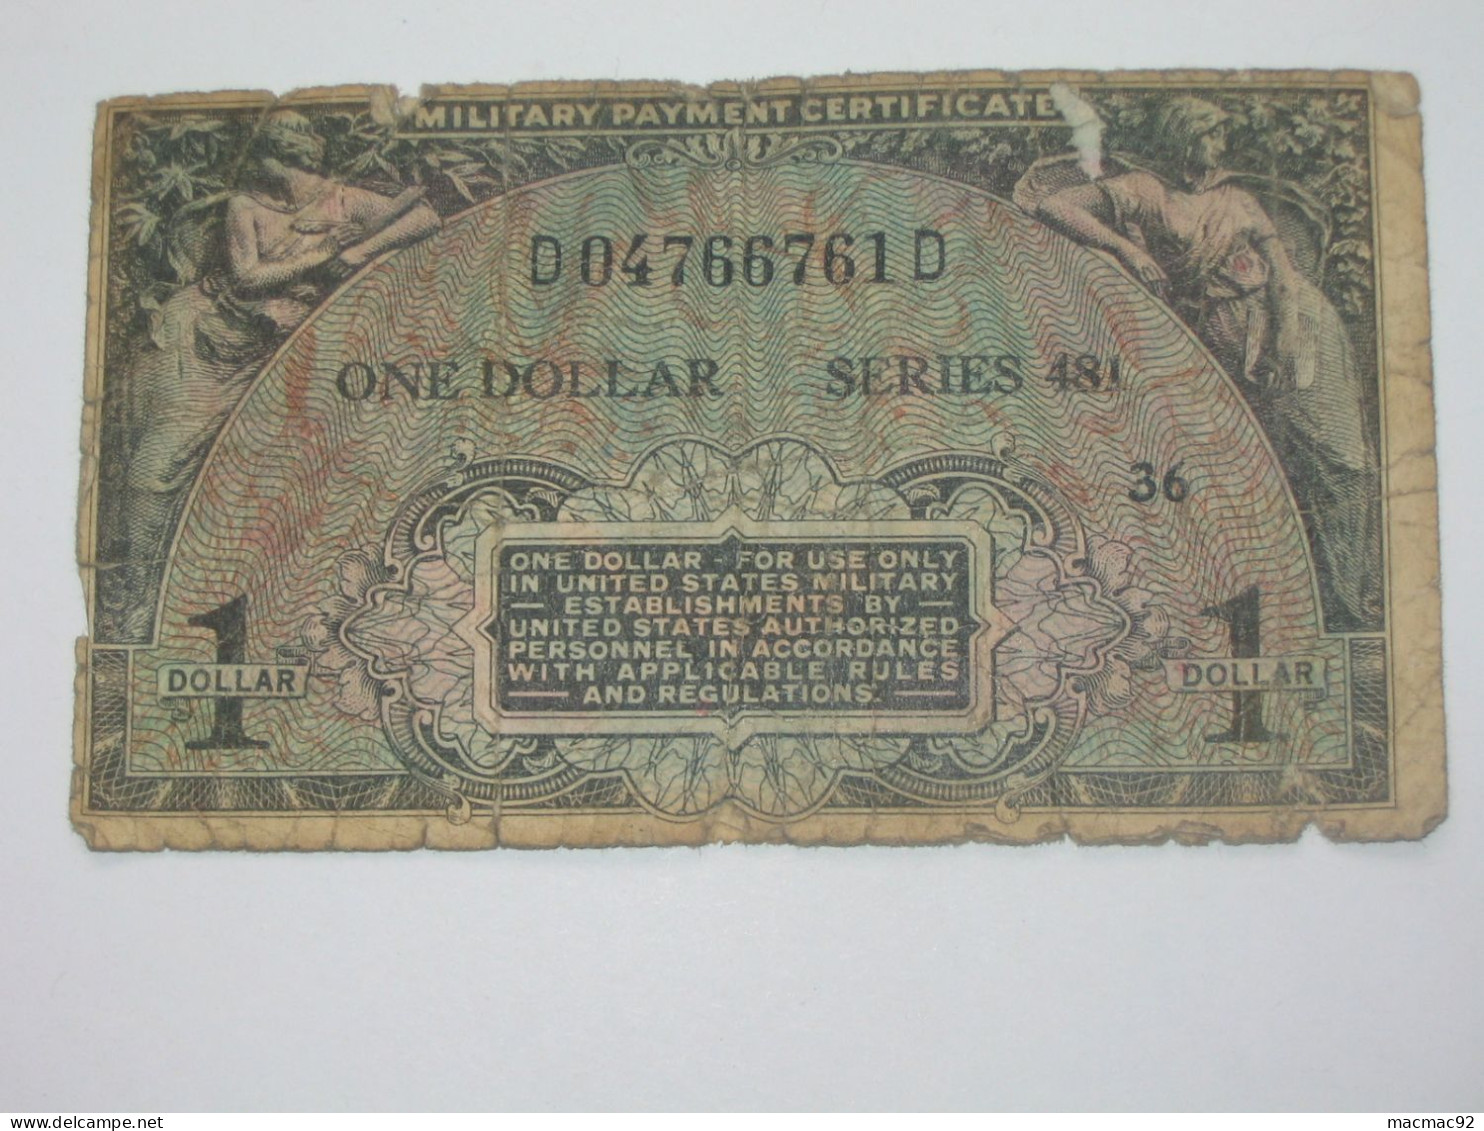 1 One Dollar  - Série 481 Military Payment Certificate    ***** EN ACHAT IMMEDIAT ***** - 1951-1954 - Serie 481